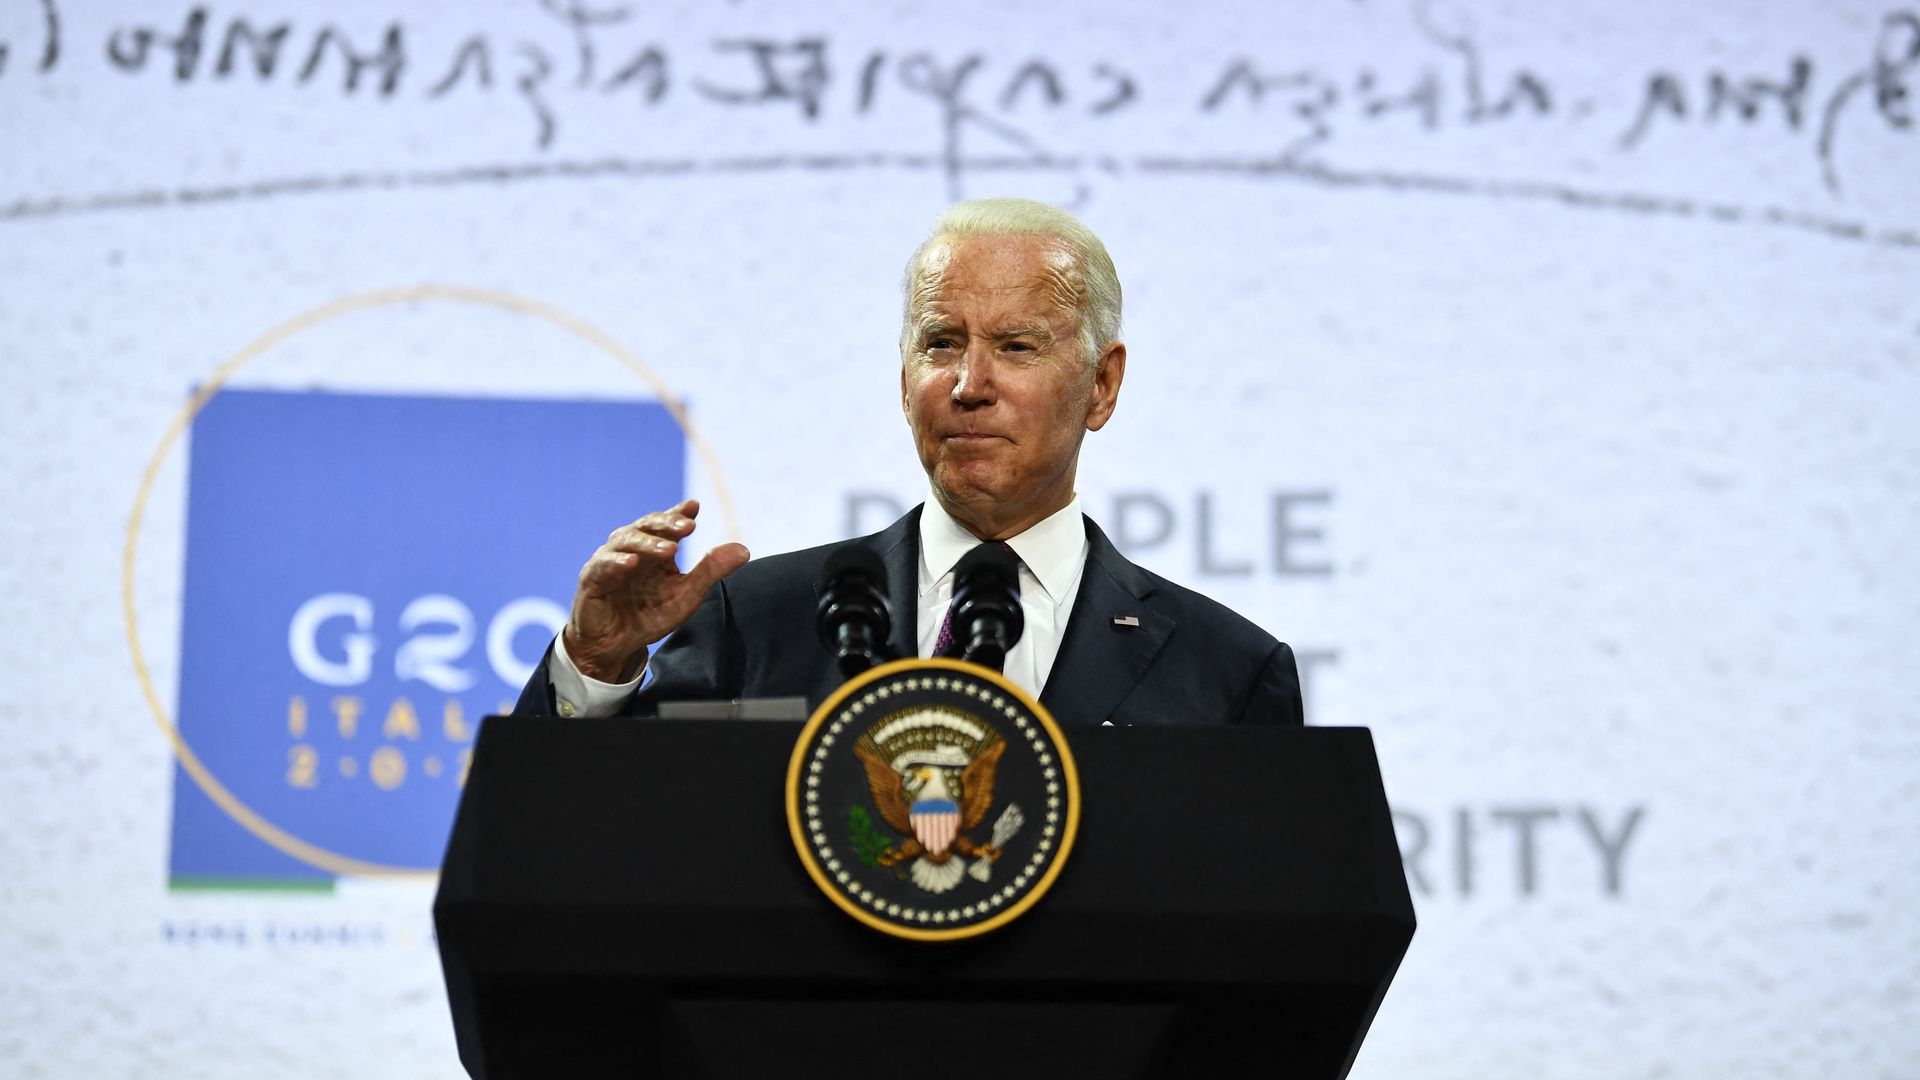 Joe Biden addresses a press conference at the end of the G20 of World Leaders Summit on October 31